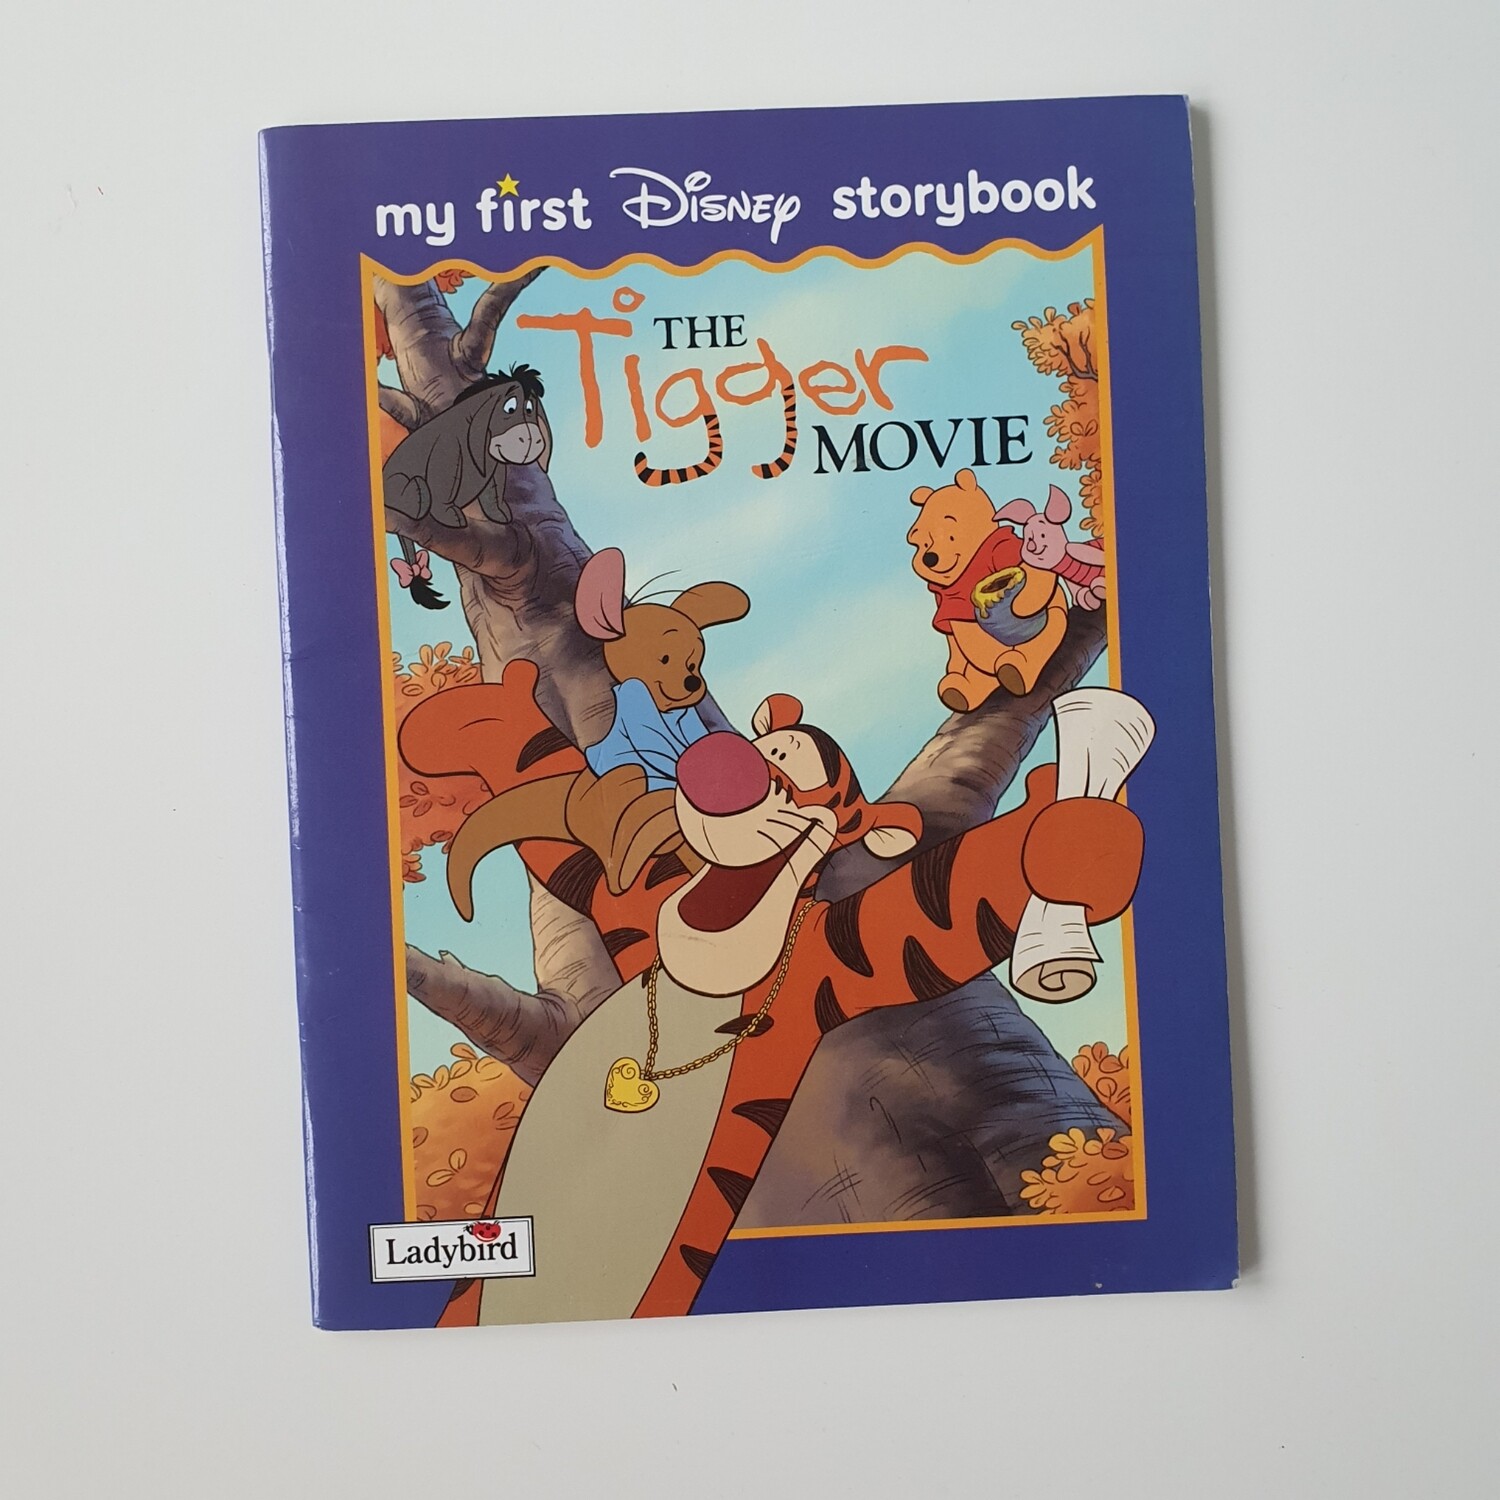 The Tigger Movie Notebook - made from a paperback book